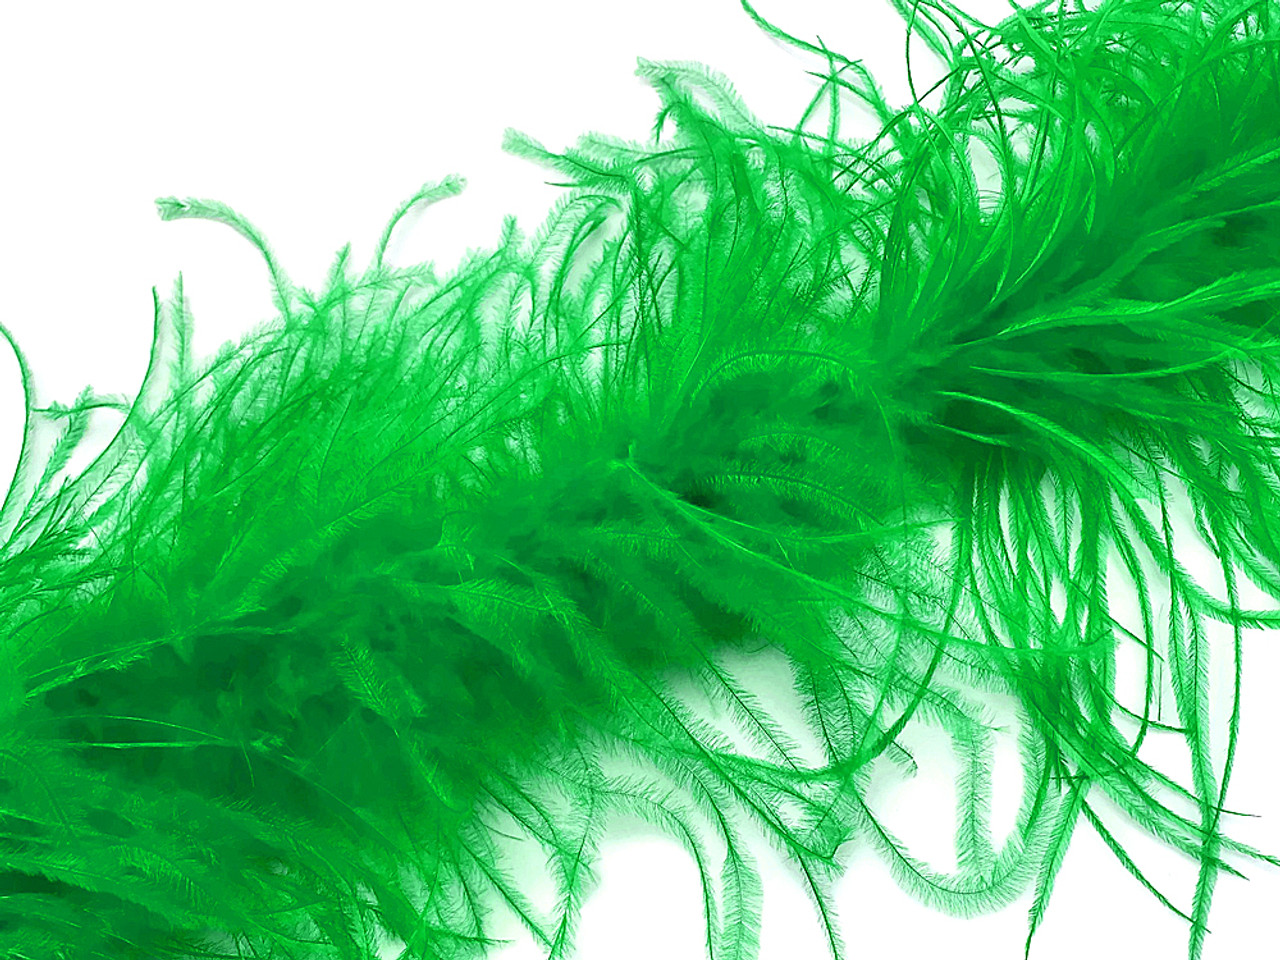 Mint Feather Ostrich Feathers Mint Green Feather Trim Craft Feathers Color  Feathers Mint Feathers Dress Feather Ostrich Trim Mint Feathers 